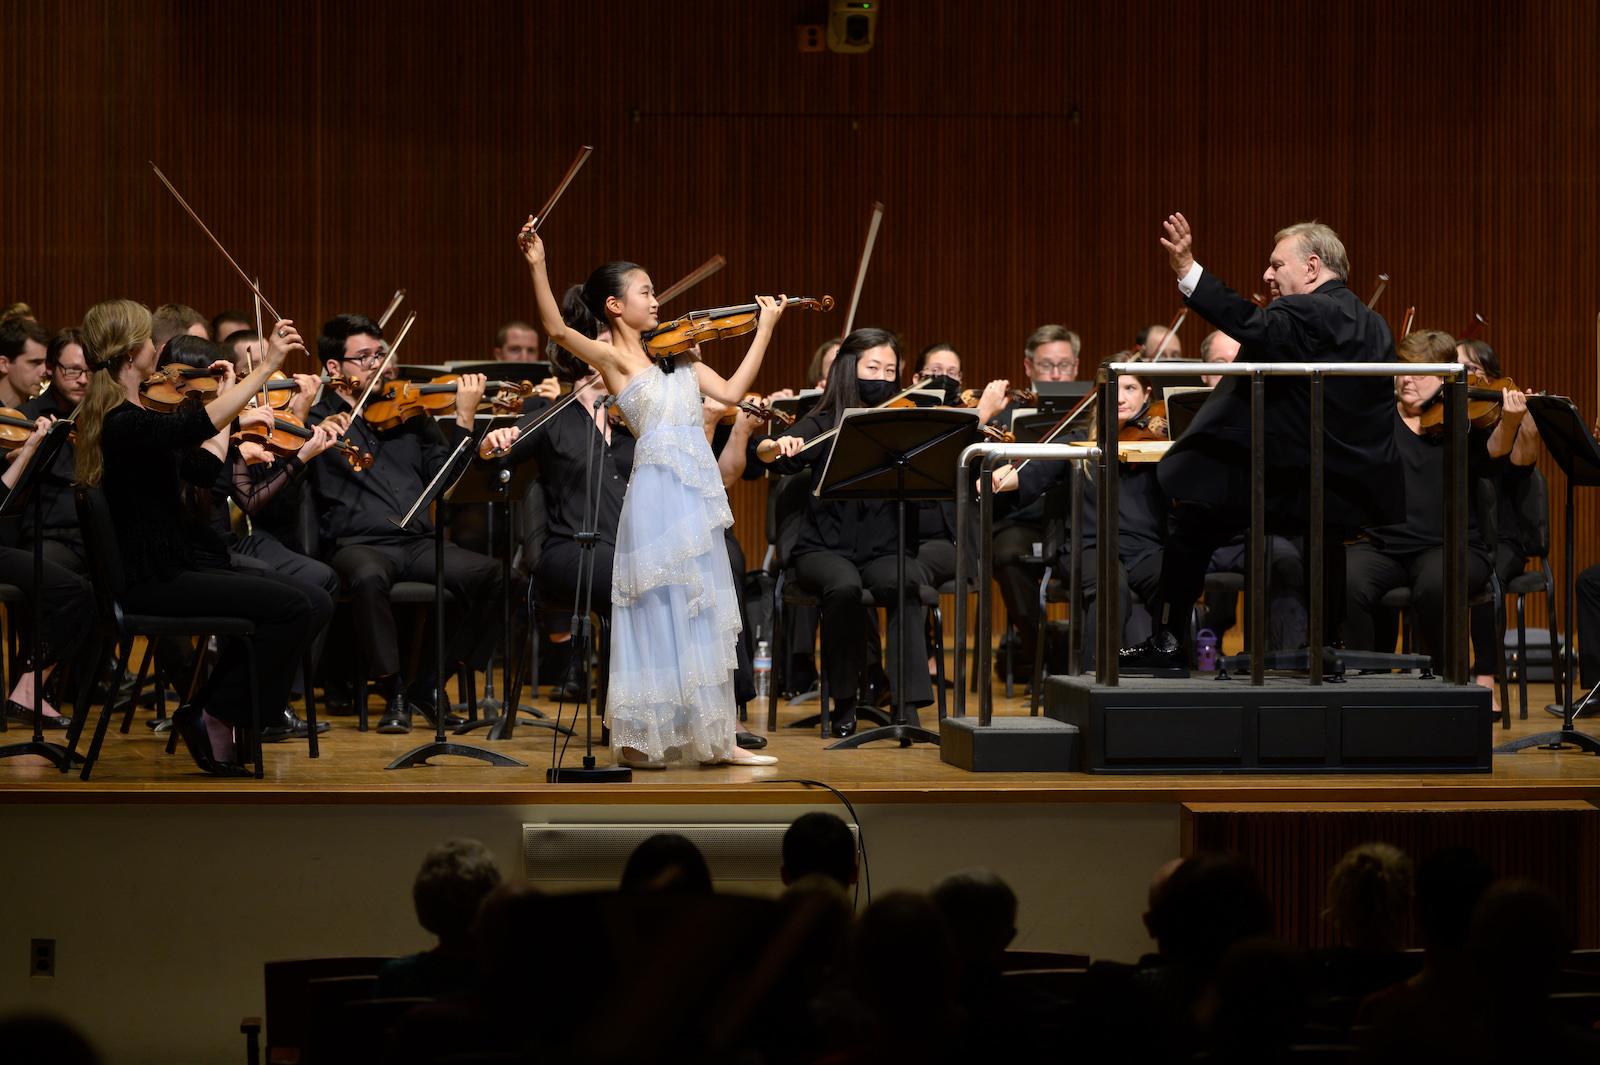 violin soloist in blue dress performs on stage with orchestra and conductor